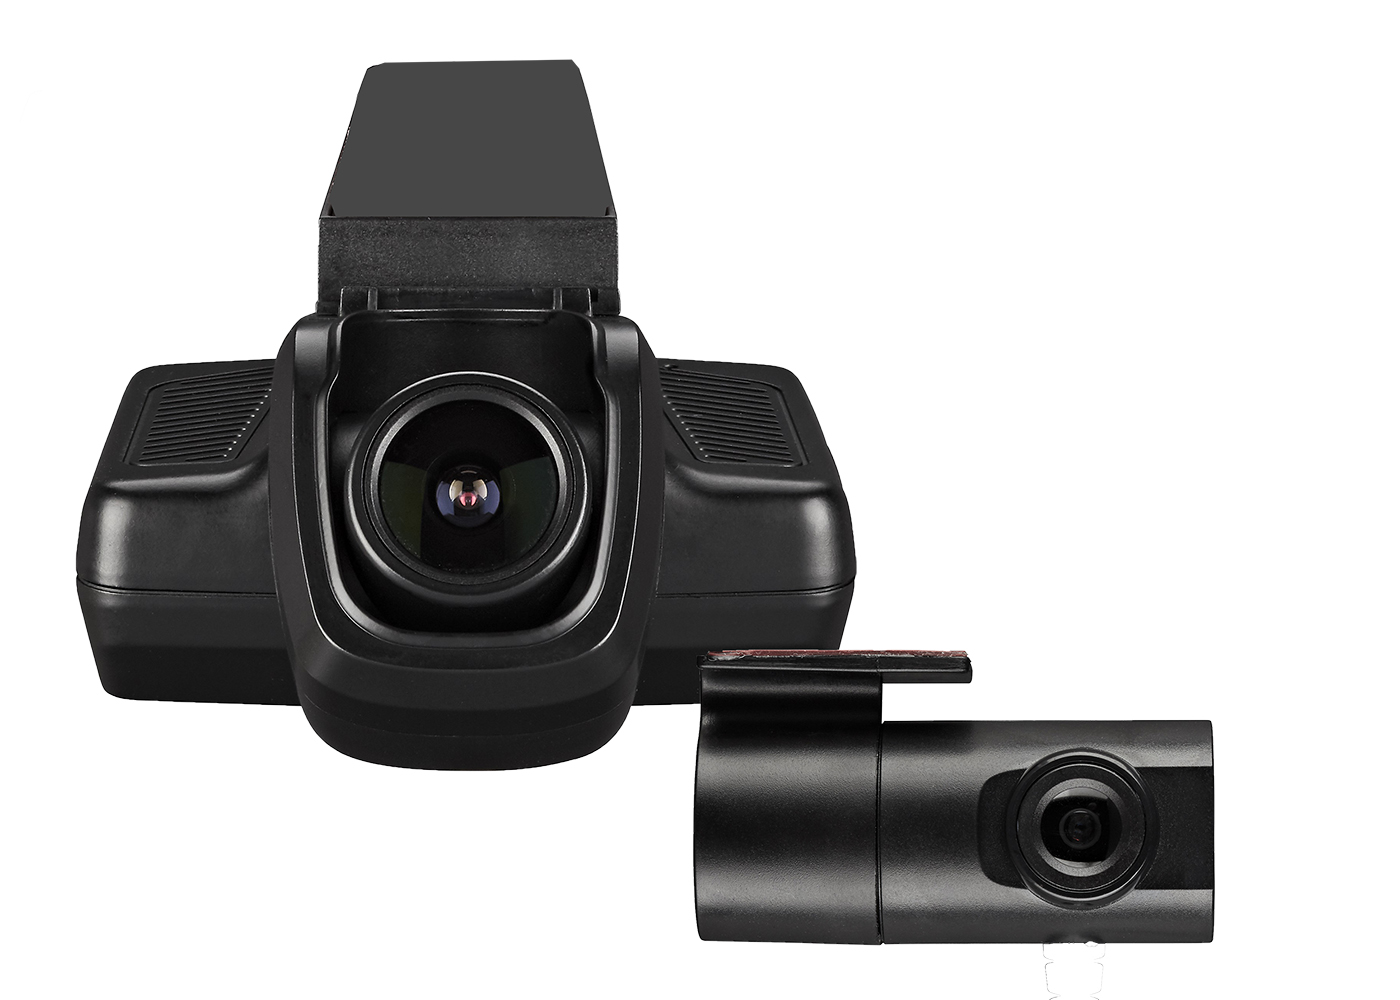 https://www.commercialvehicleproducts.co.uk/store/dash-cameras/ring-trade-pro2-dash-camera/RVEP2_01.jpg